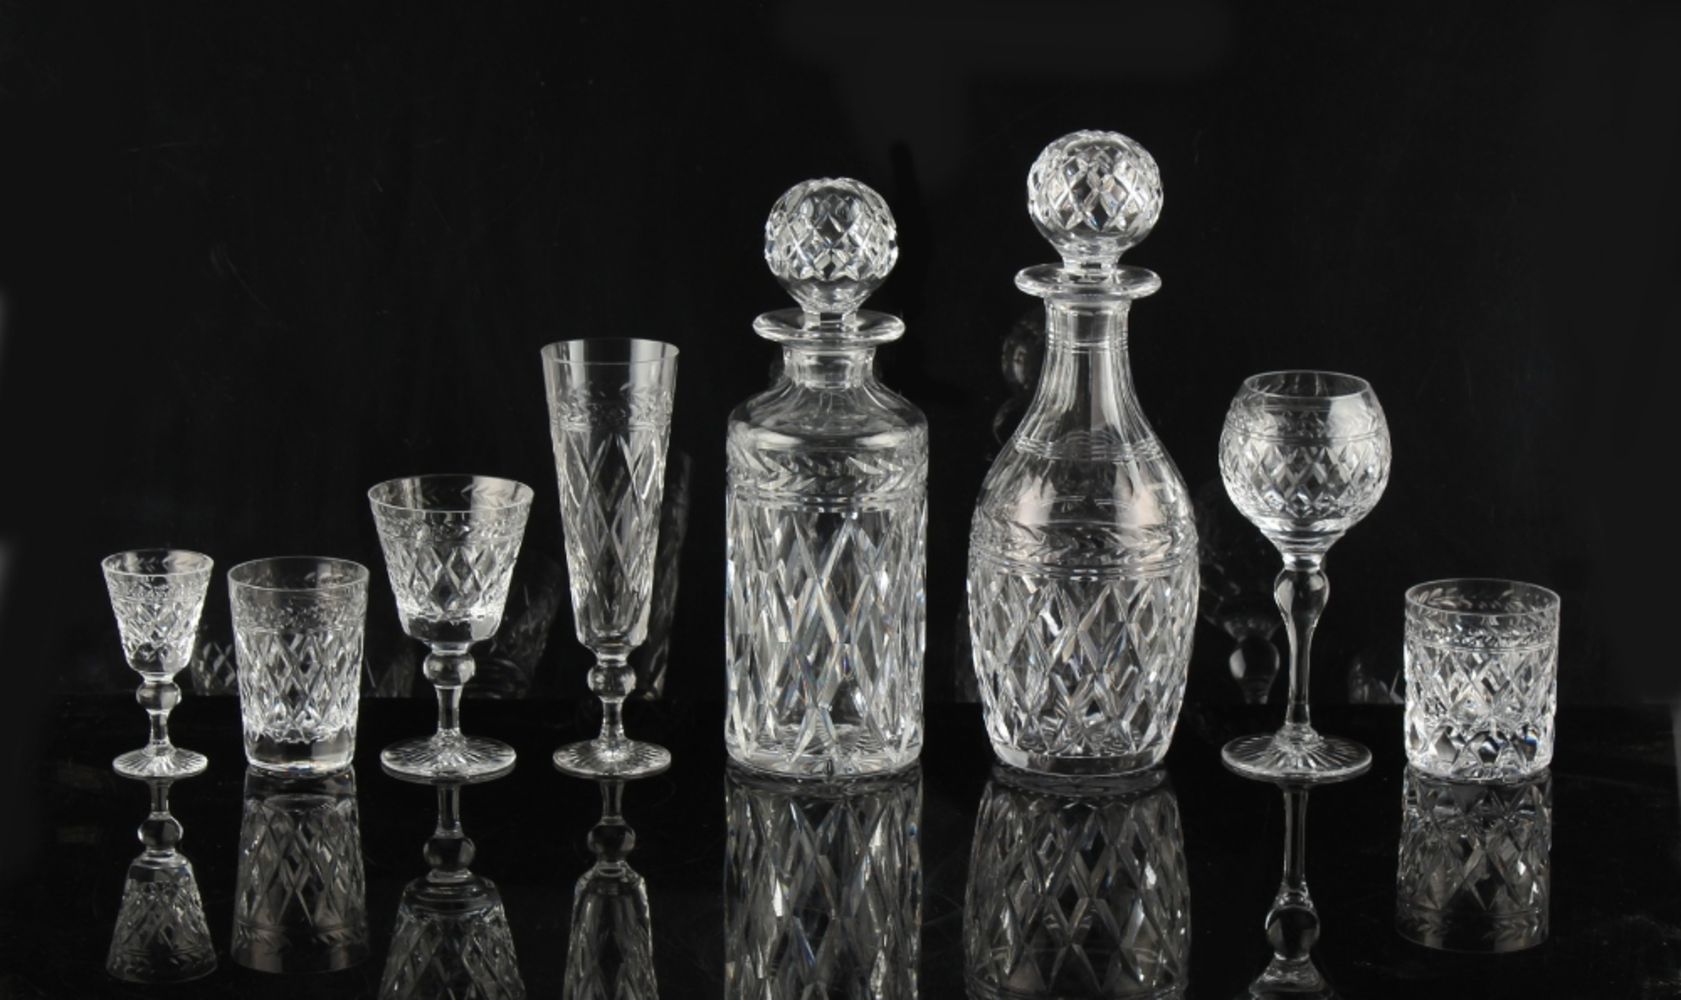 European Ceramics & Glass; Pictures, Books & Prints; and Antique Furniture & Objects